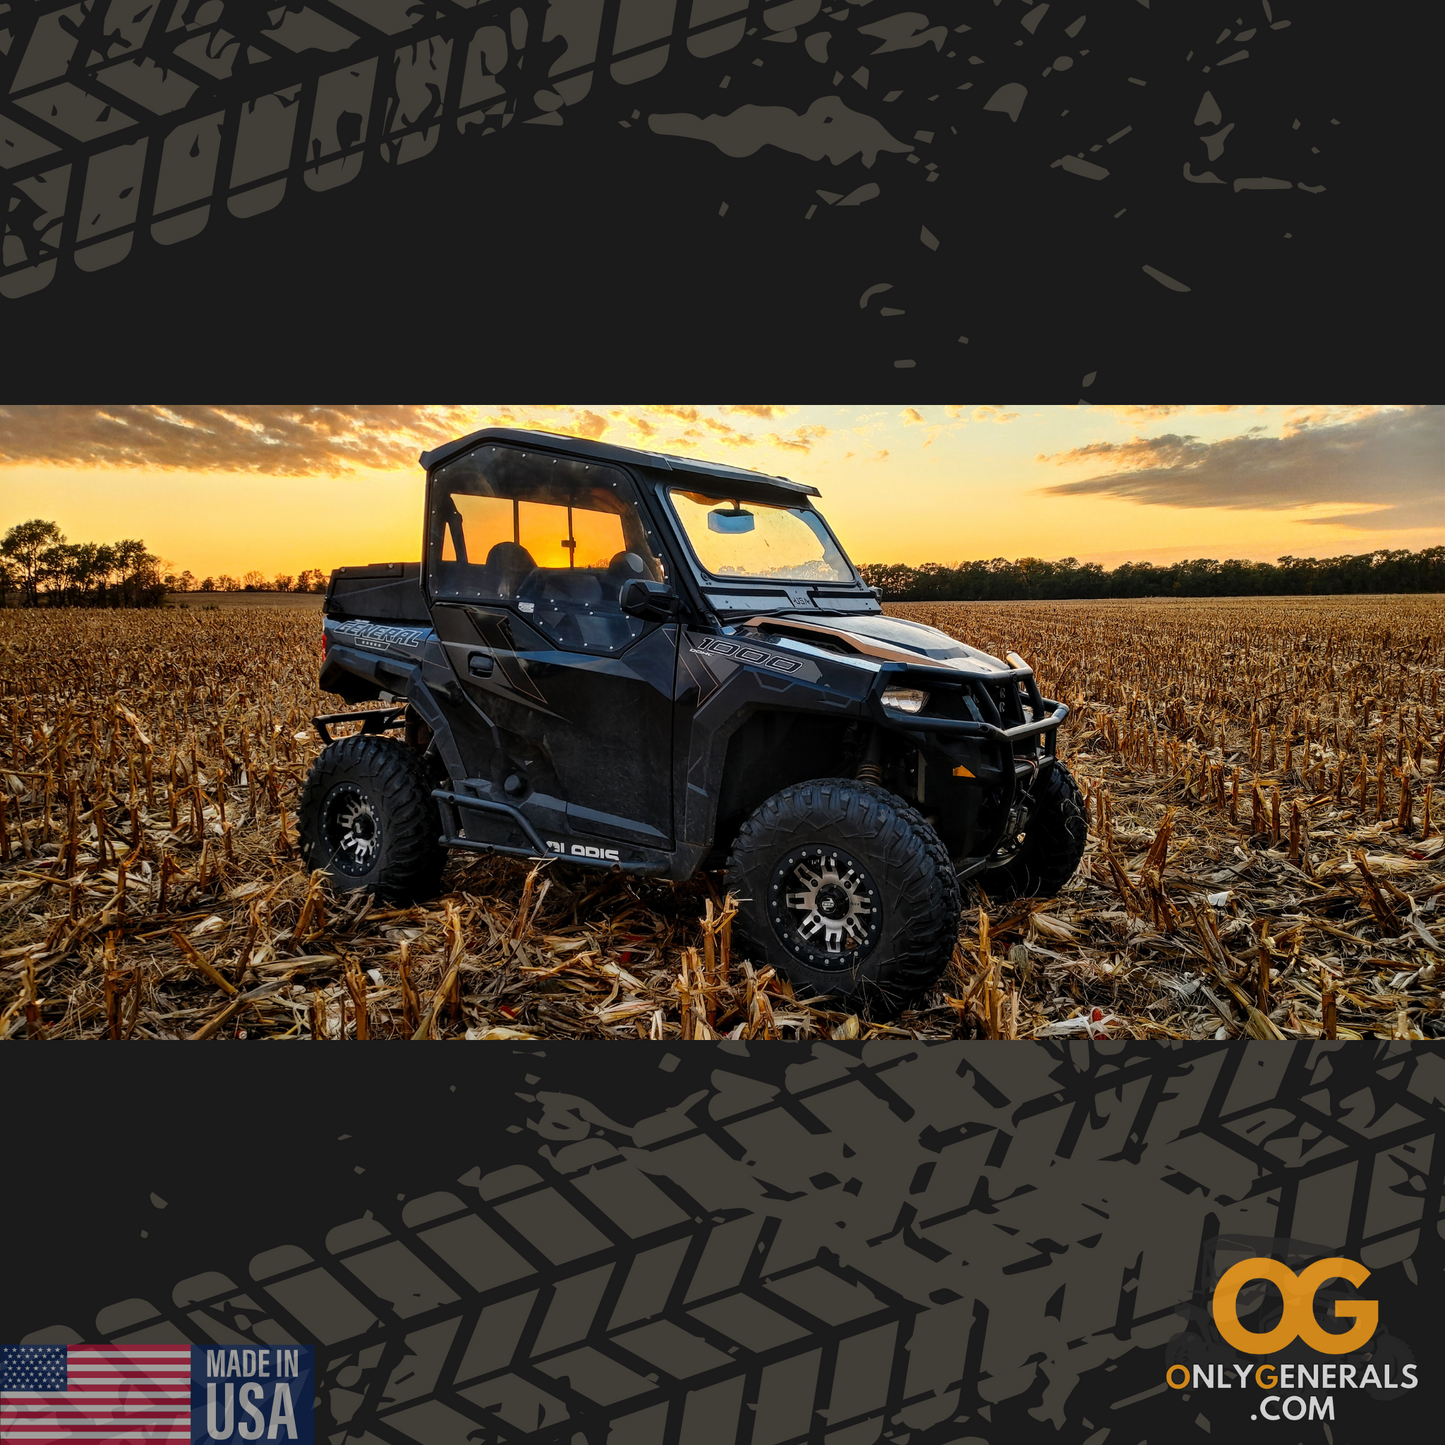 After the harvest, showing a Polaris General with OnlyGenerals SideskinsLITE hard upper doors installed sitting in a corn field